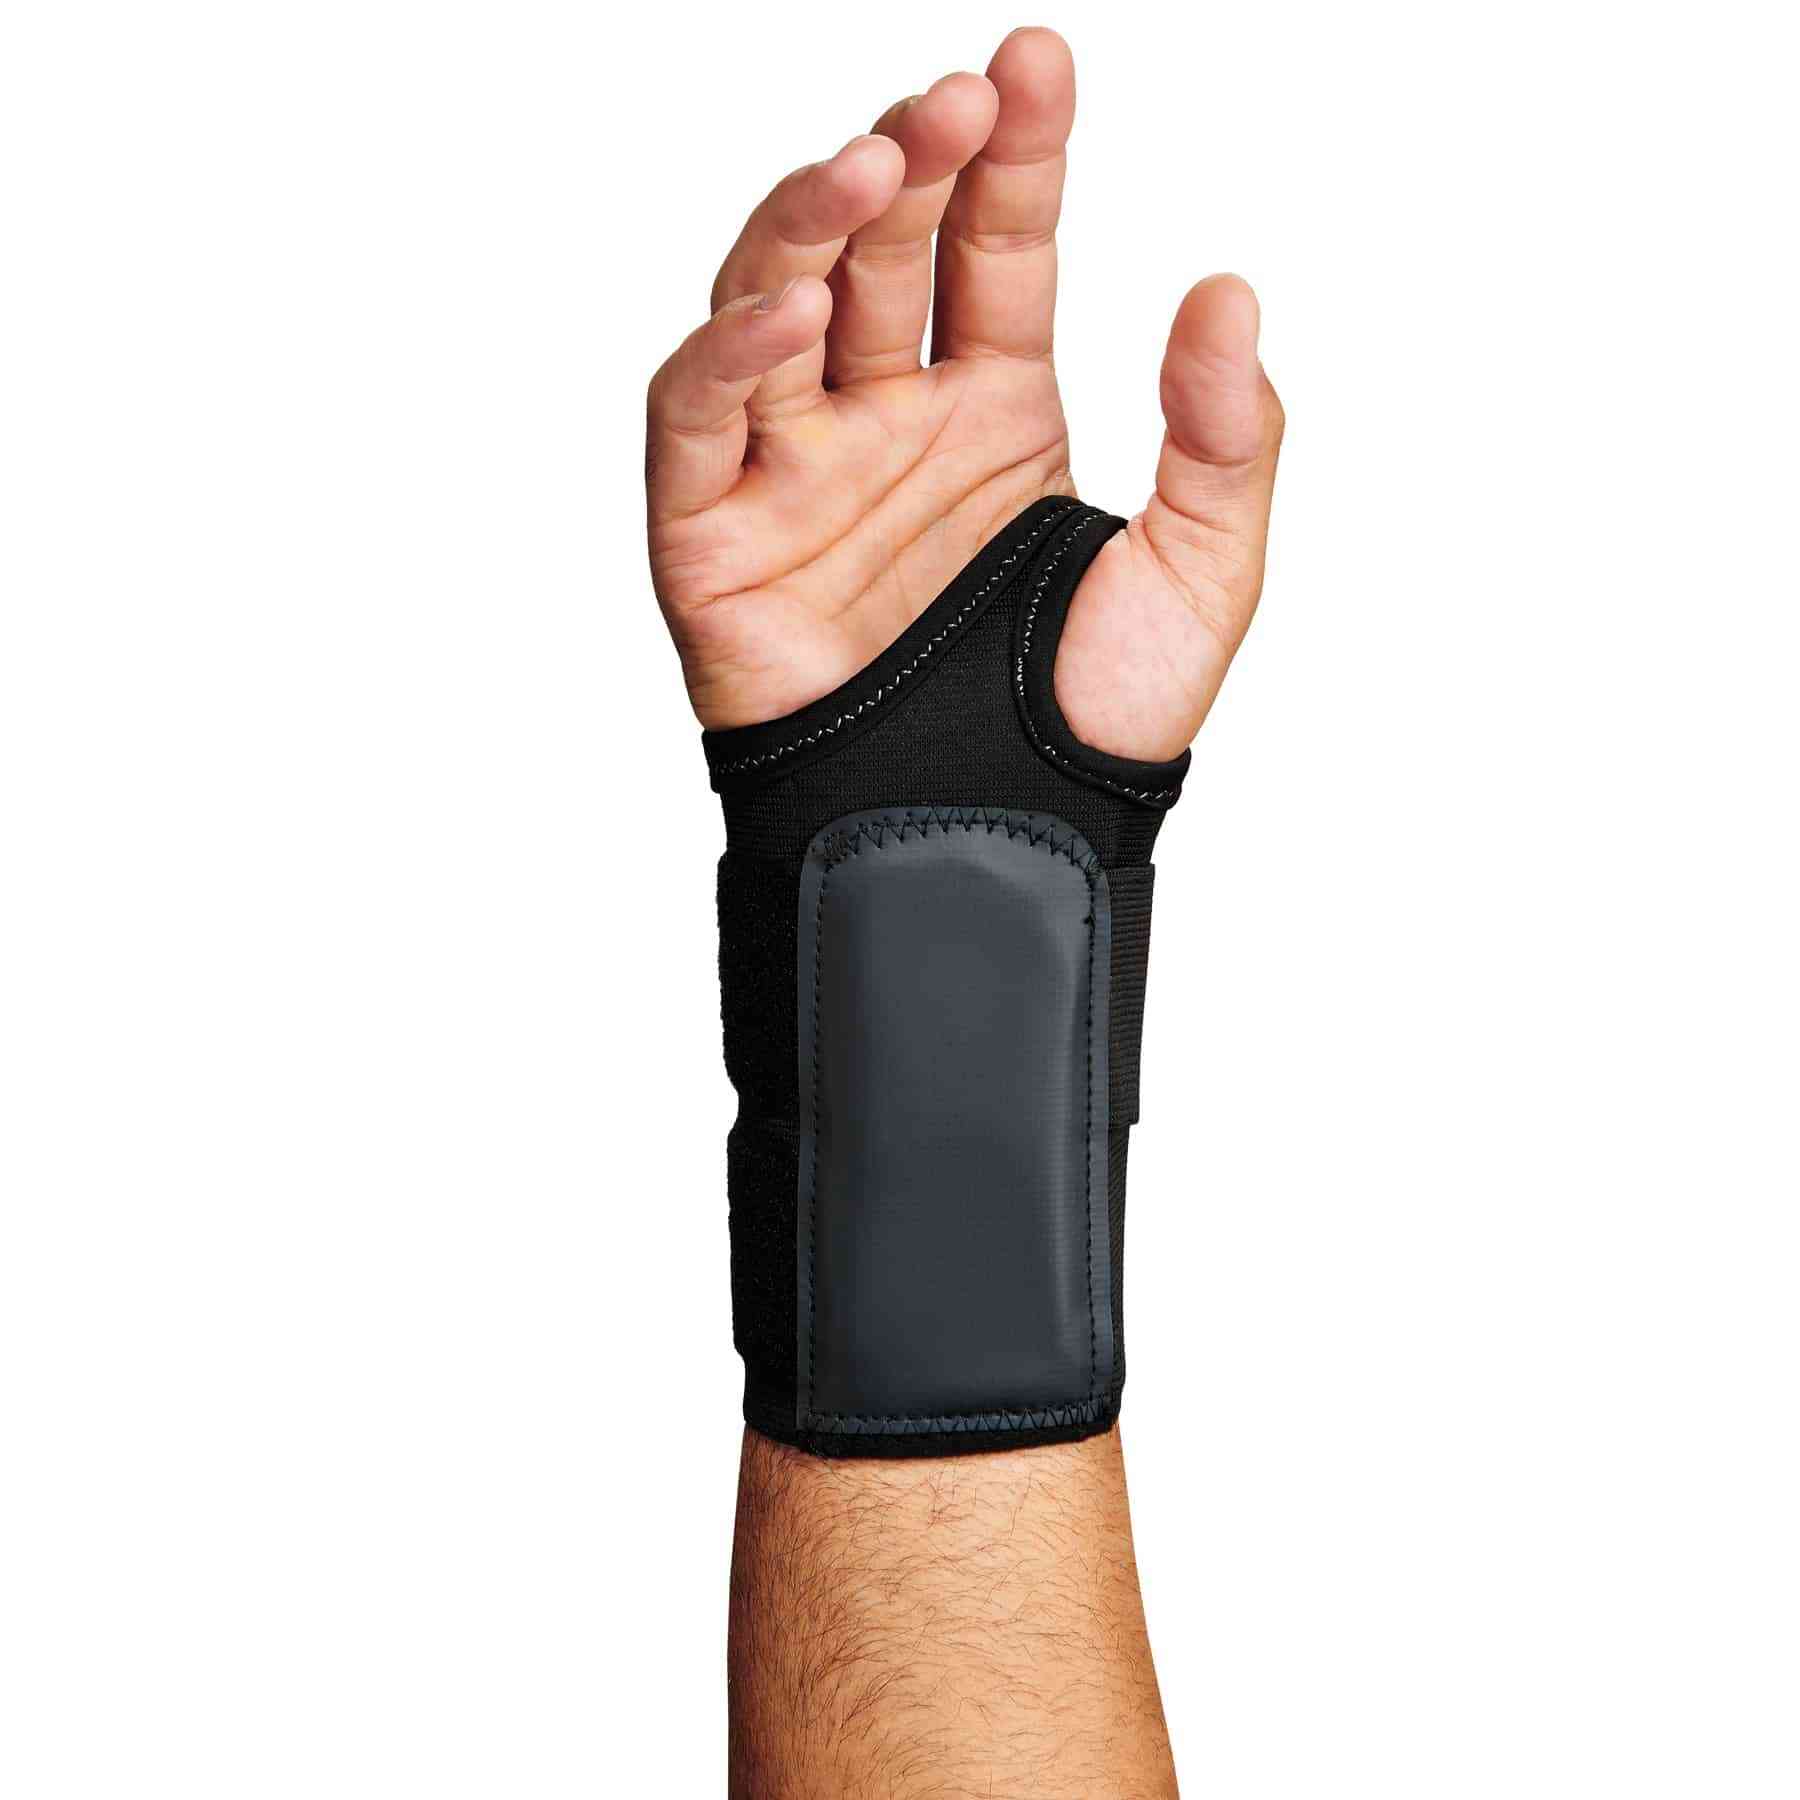 Double Strap Wrist Support - Wrist Supports